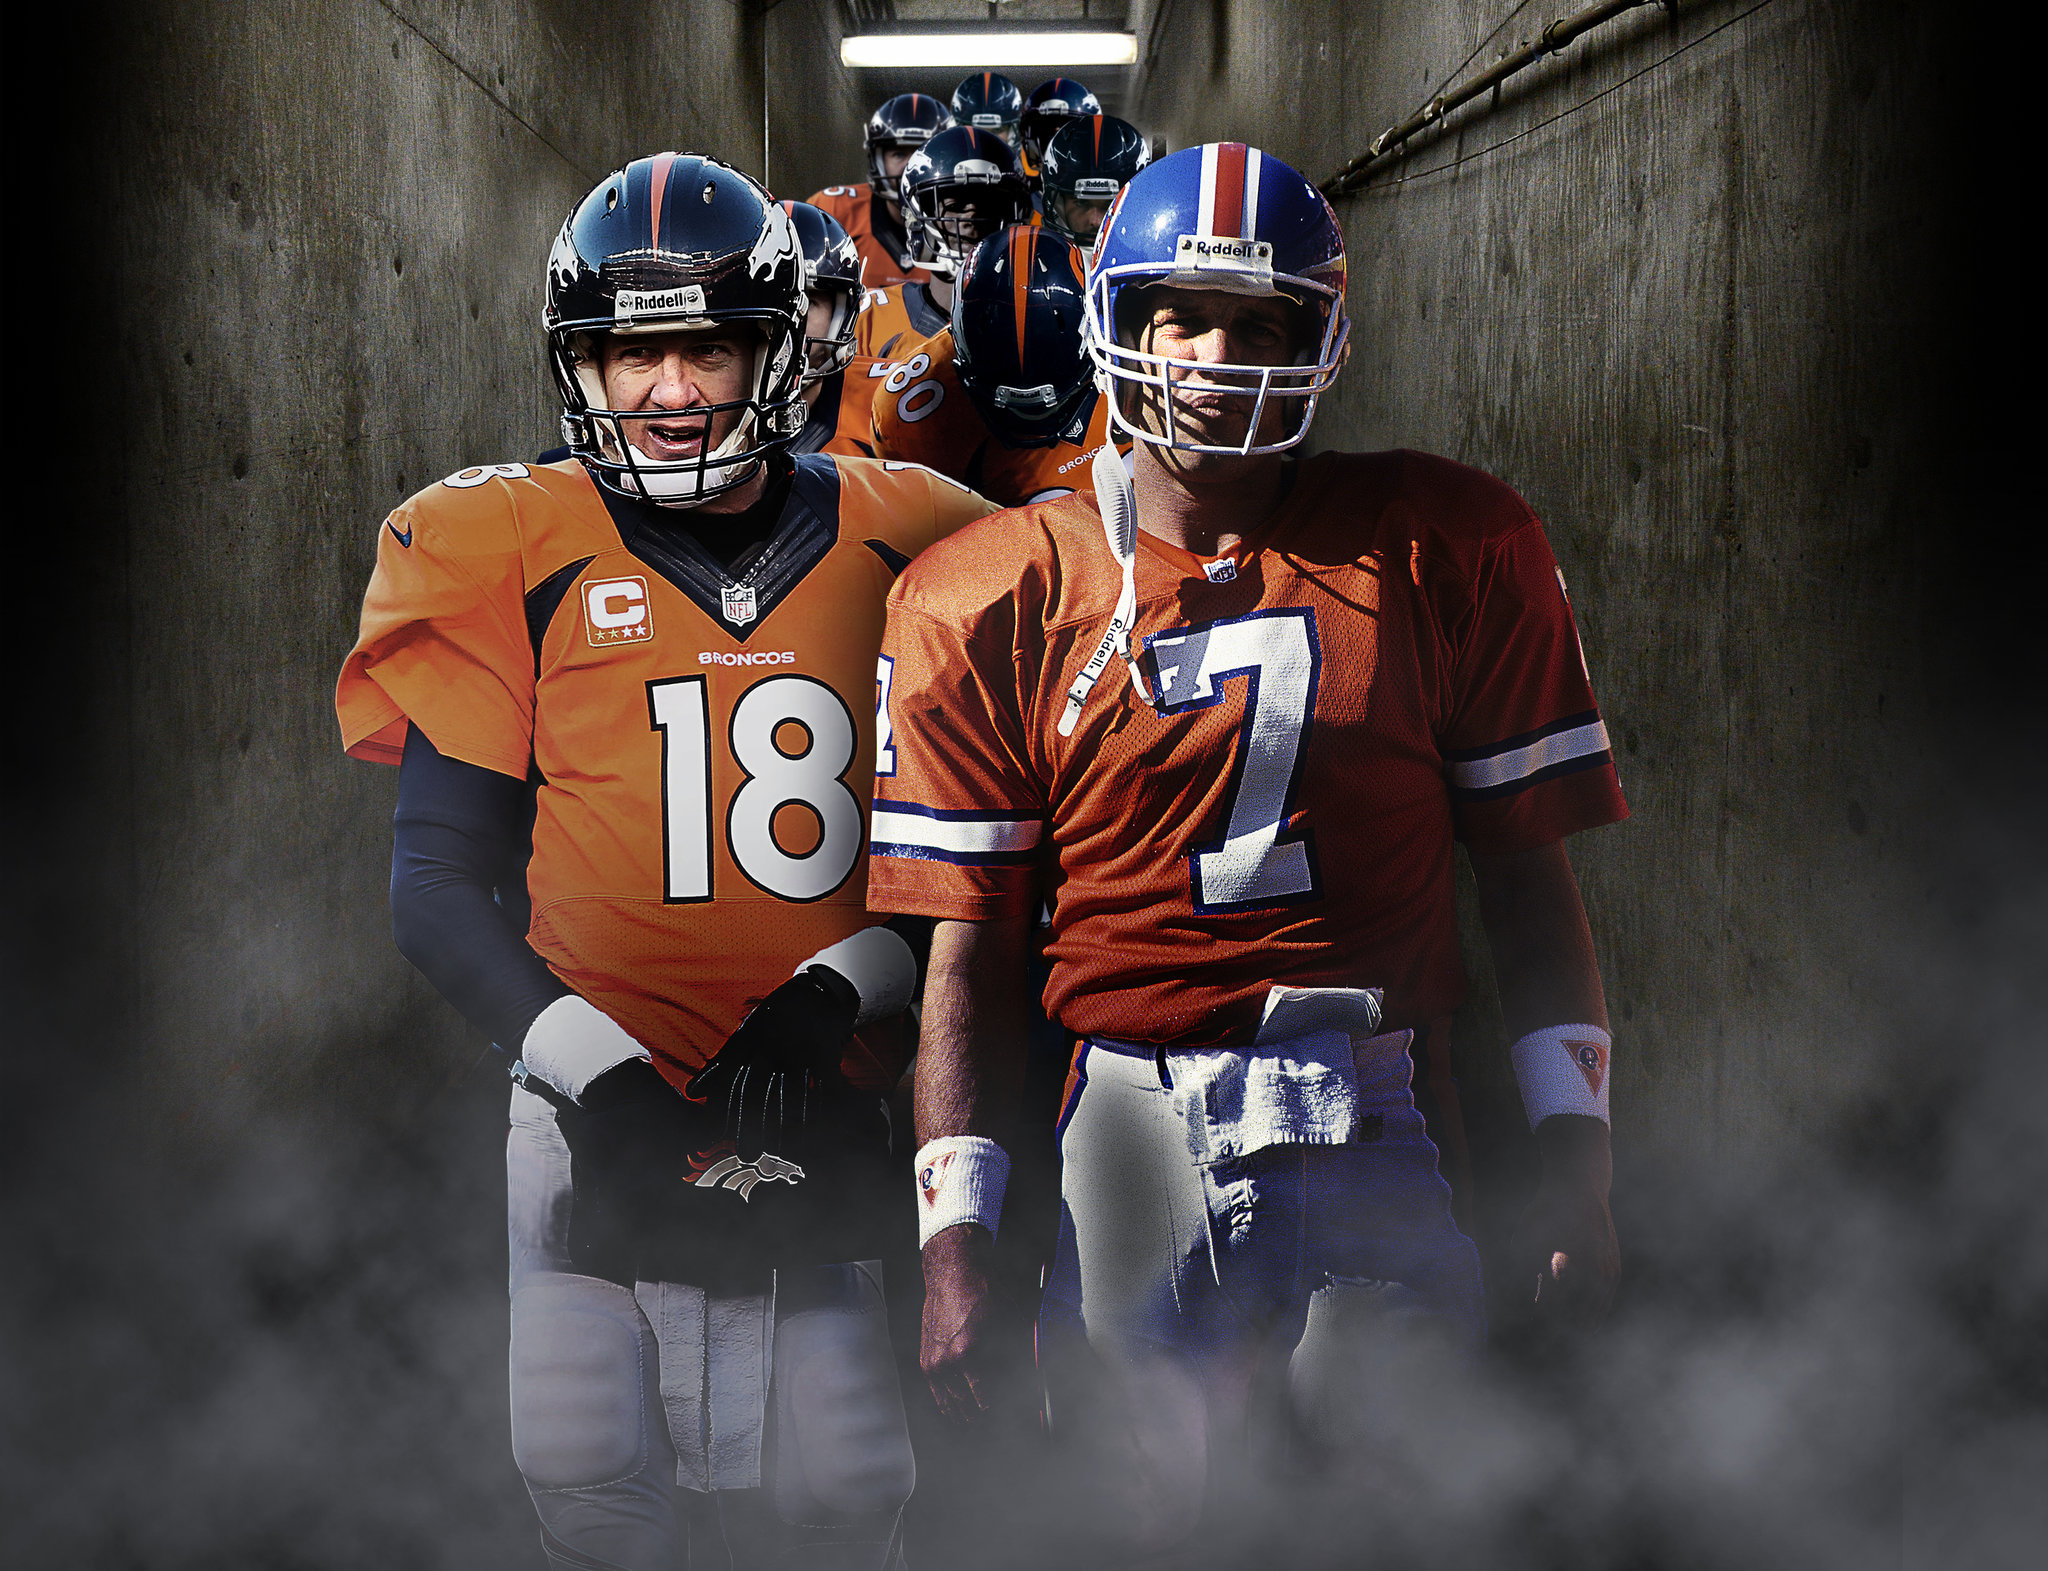 2048x1571 Two Broncos Quarterbacks, Sparkling in the Twilight The New York Times